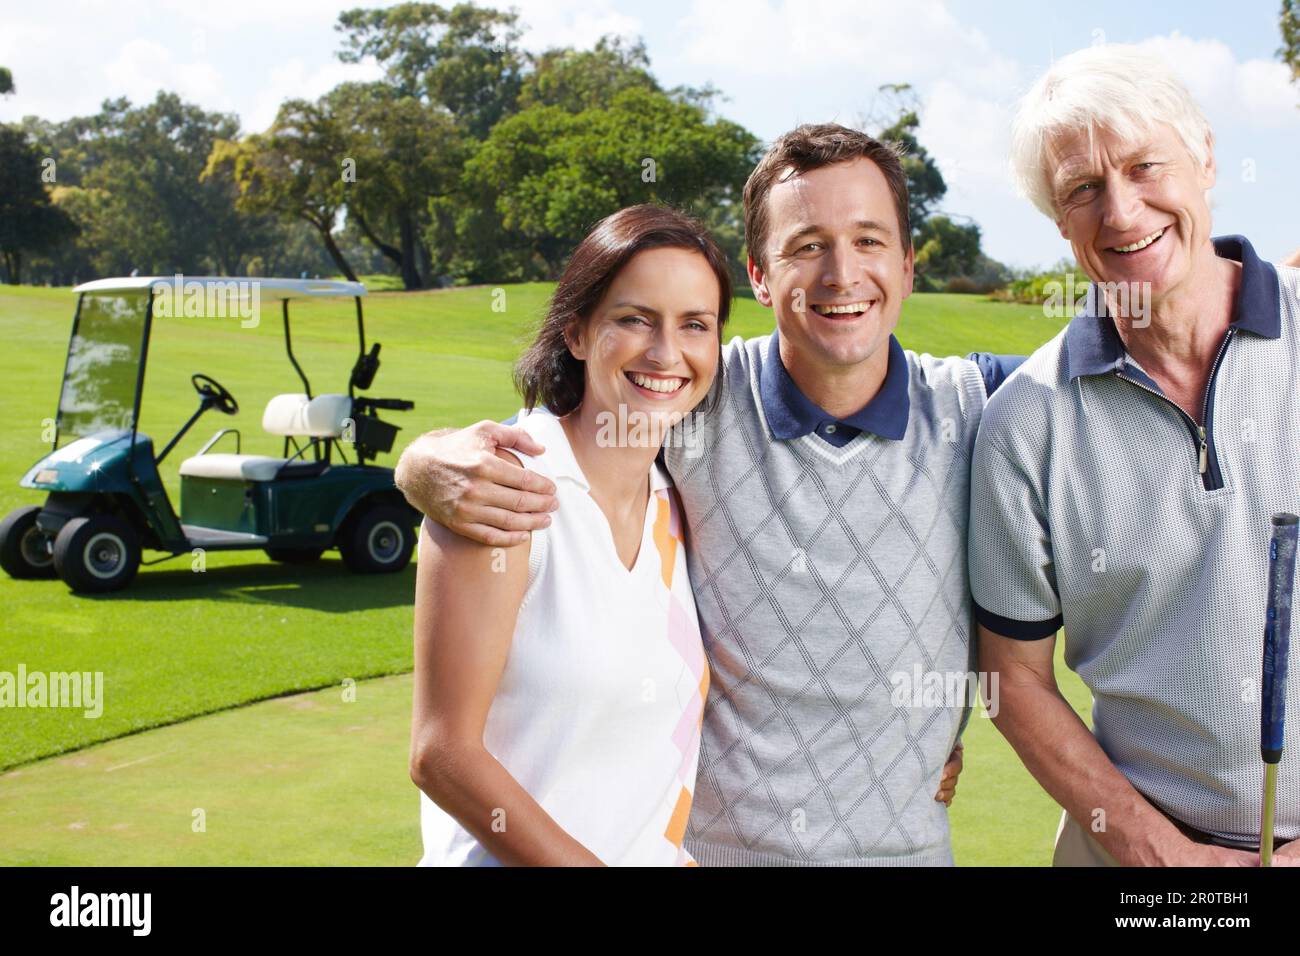 Golf is an important part of their relationship. Smiling golfing companions on the green with their golf cart in the background. Stock Photo